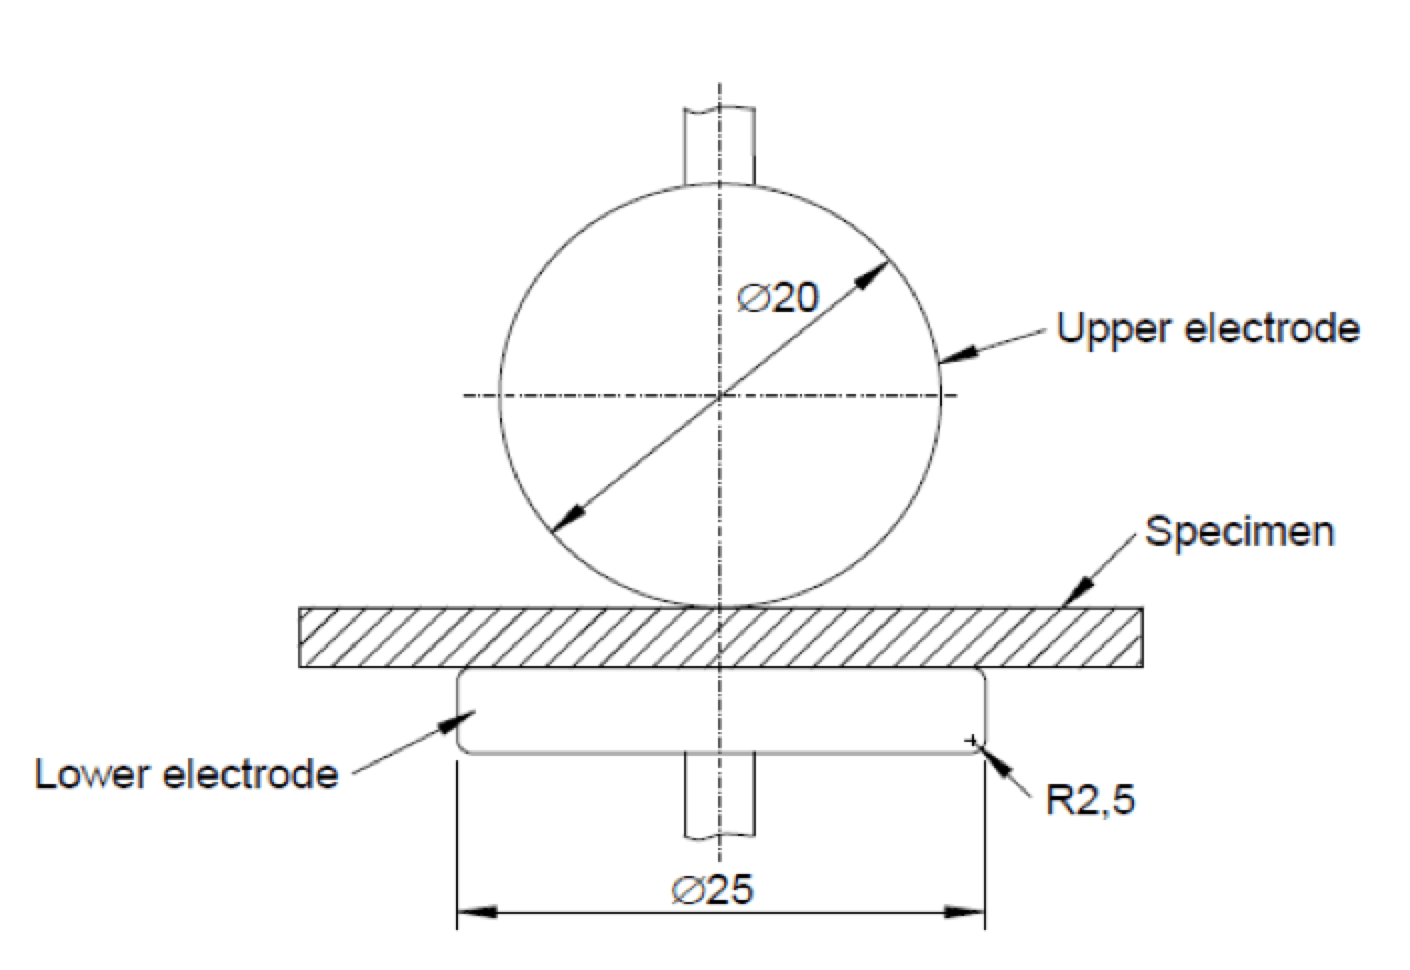 Fig. 14: Proposed electrode arrangement in new edition of IEC 60243-1.